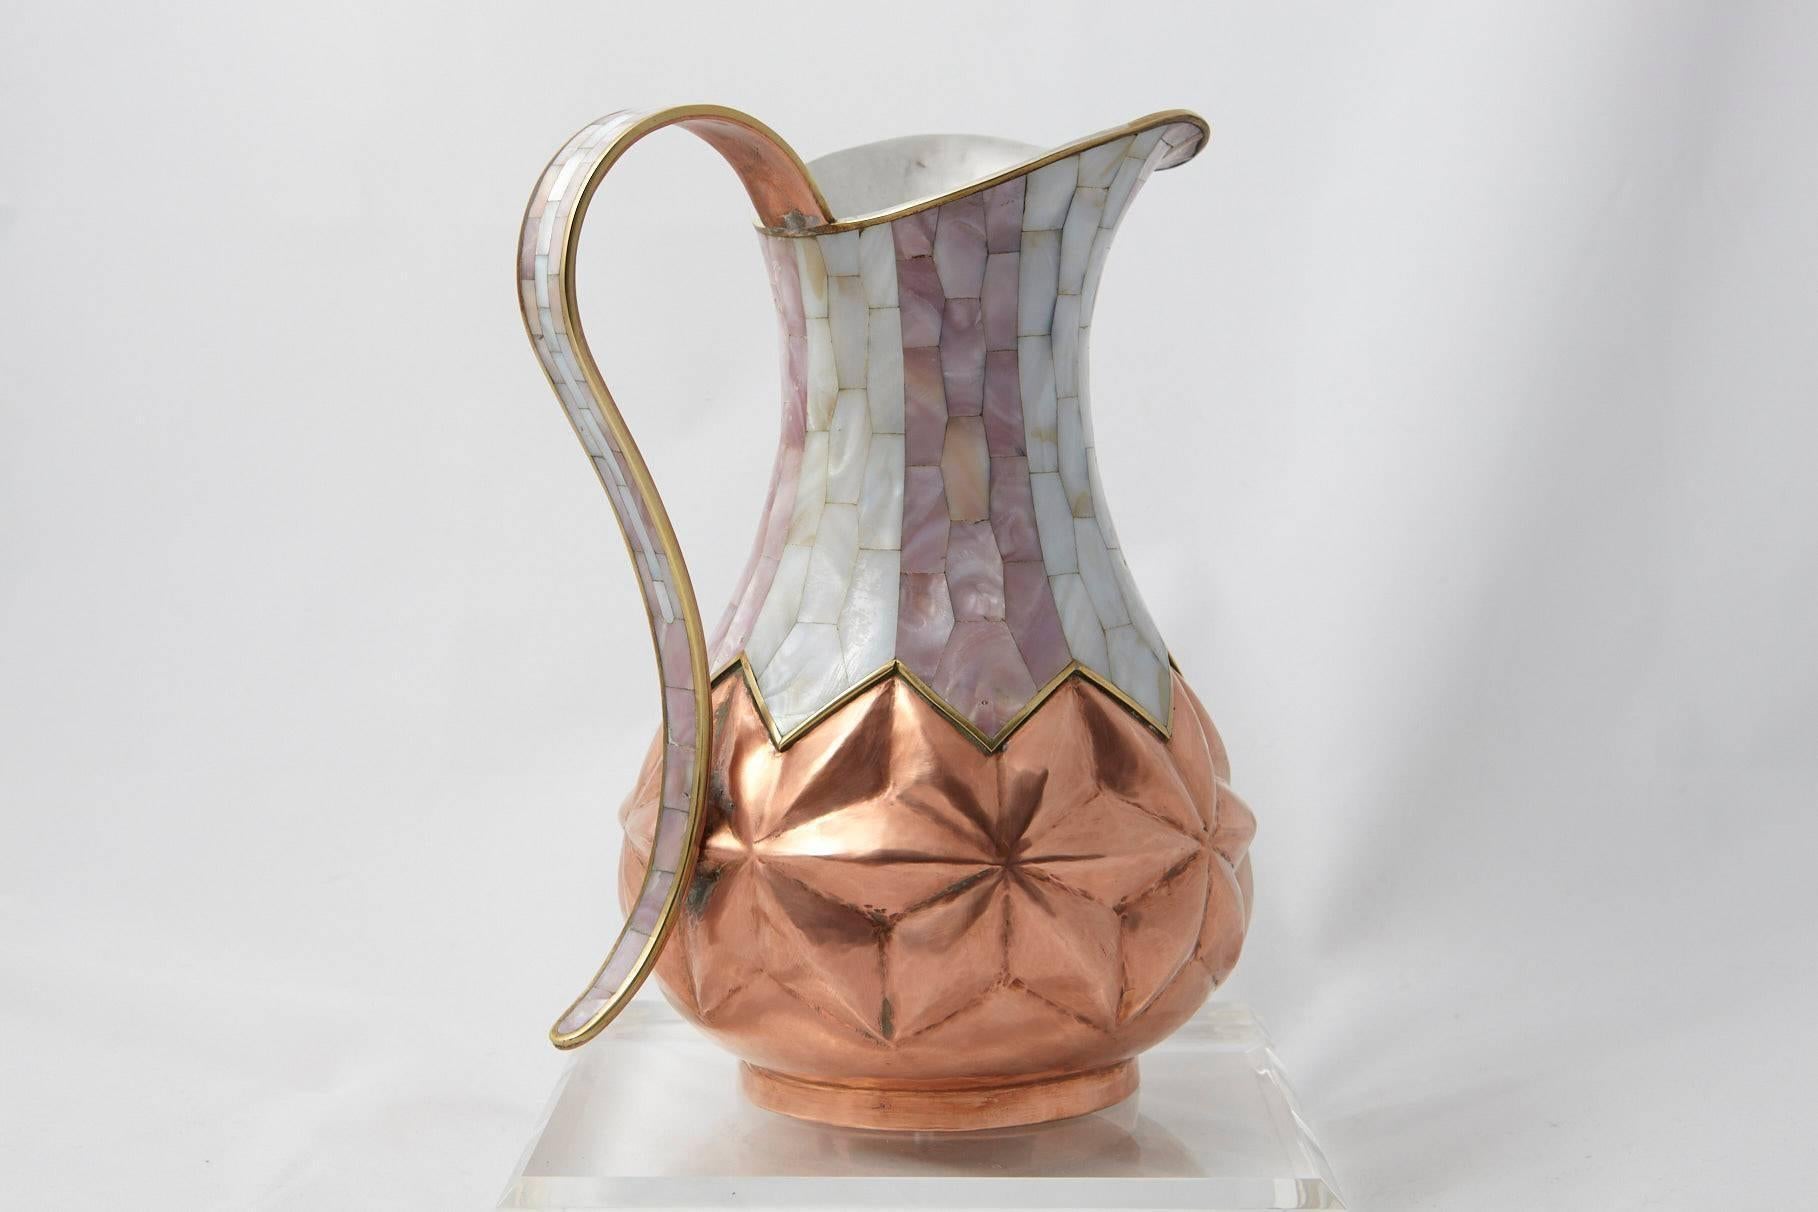 A very fine sample of traditional Mexican silversmith work, an exceptional hammered brass and silver plate pitcher with mother-of-pearl inlays from Los Castillo Taxco.
The pitcher is marked on the underside: TA-01, Hecha en Mexico, Los Castillo